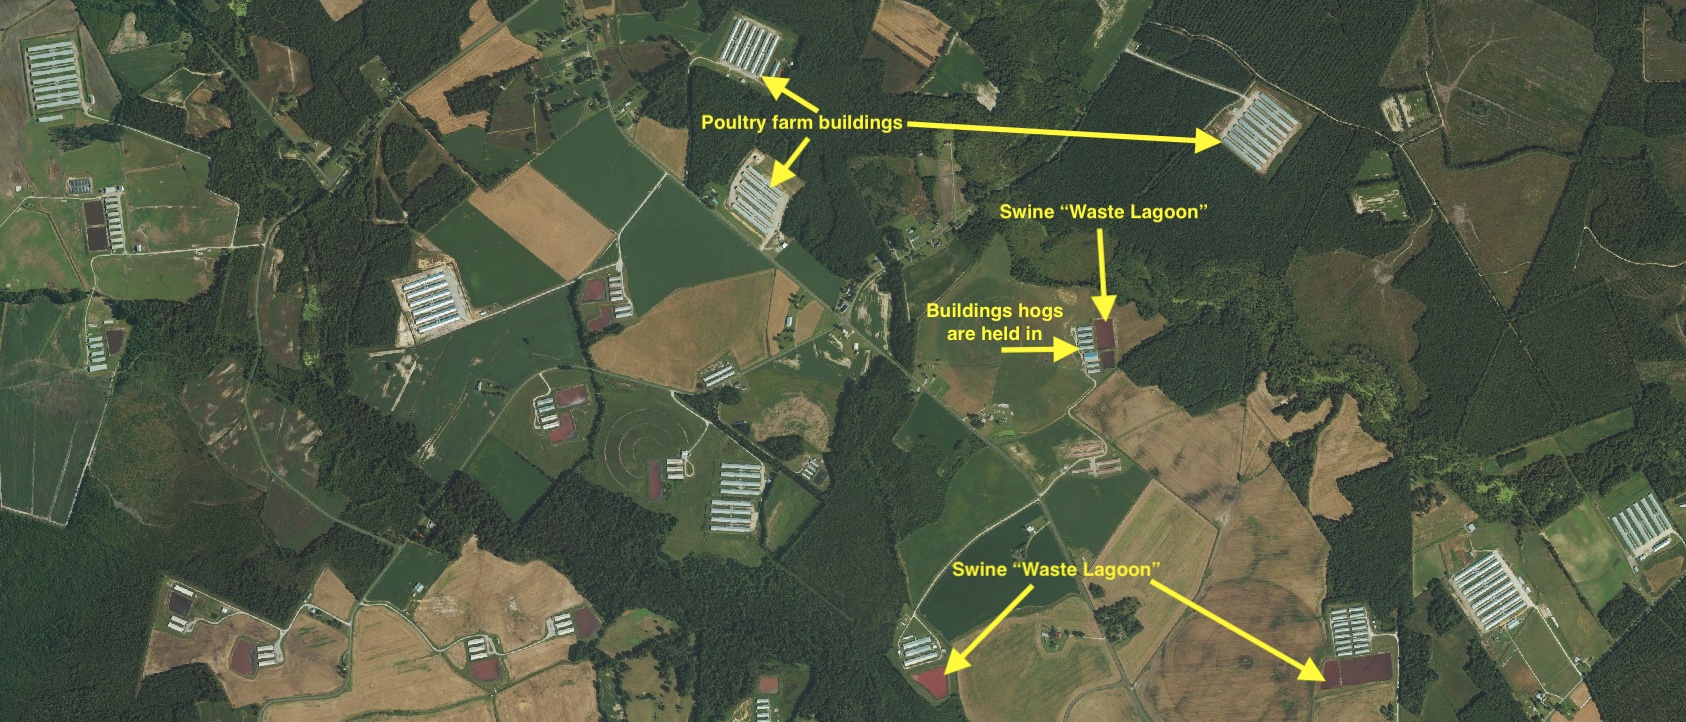 Aerial image of poultry and swine CAFOs (concentrated animal feeding operations) in the coastal plain of southeastern North Carolina adjacent to the Northeast Cape Fear River; image also shows where poultry farm buildings, swine "waste lagoons," and buildings holding hogs are located.